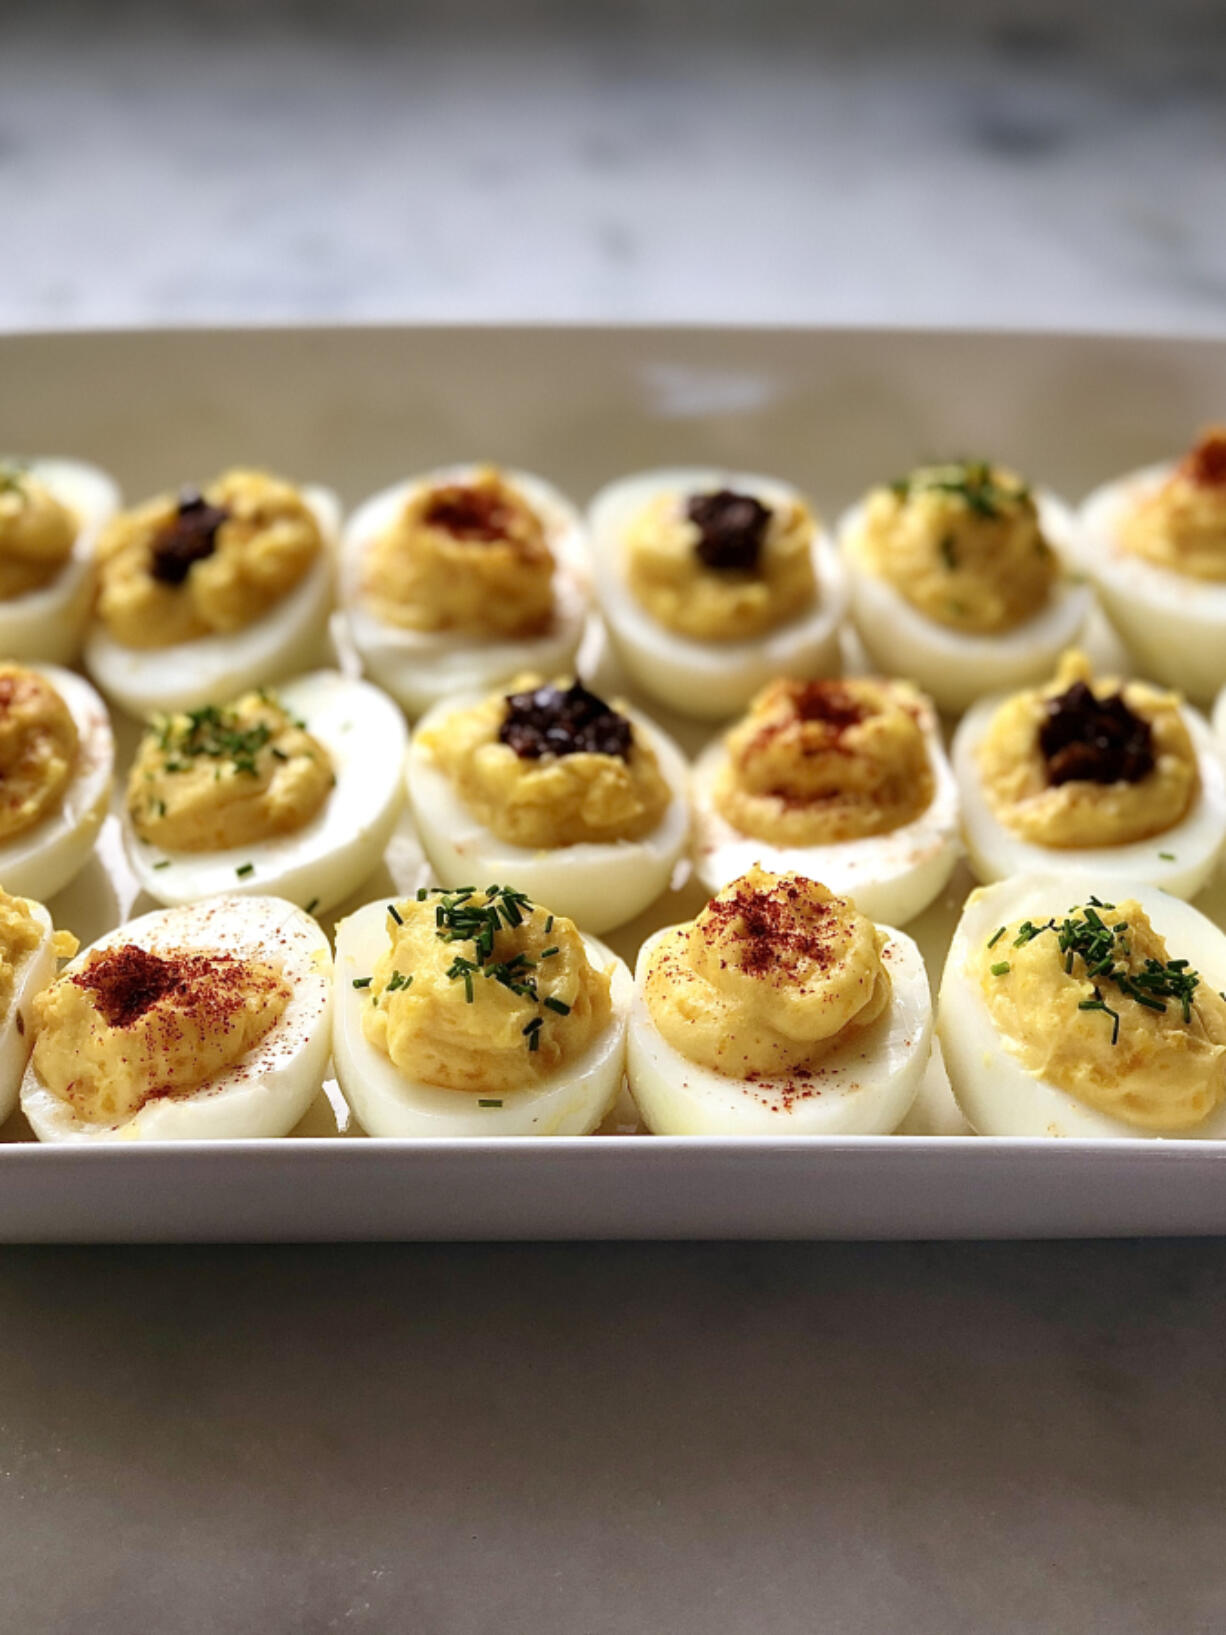 Deviled eggs just dusted with paprika are always a favorite.